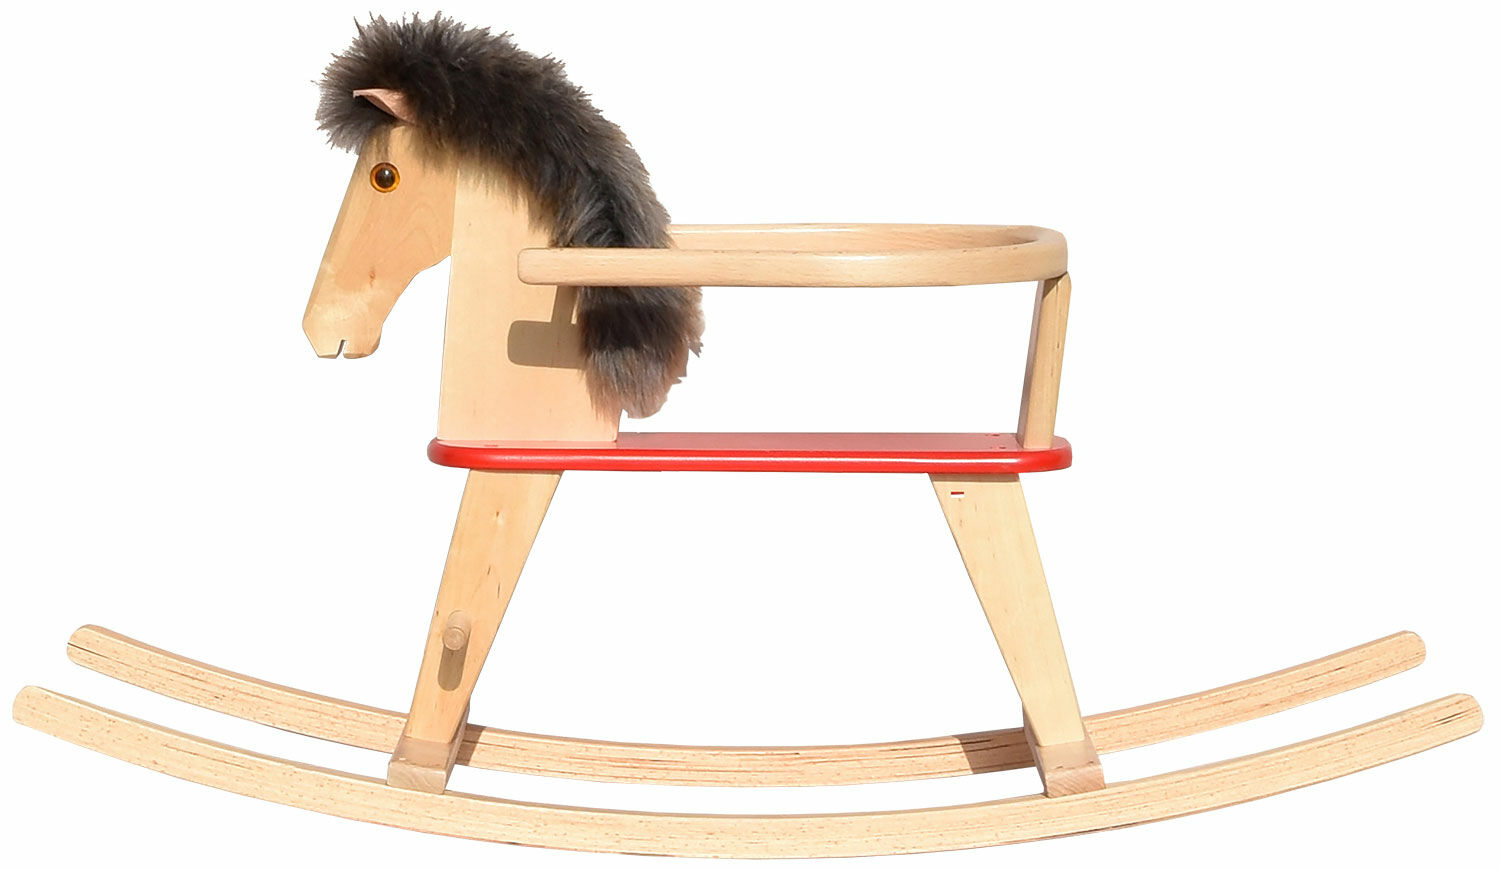 Rocking horse "Conny" (for children up to 4 years) by Hanns-Peter Krafft